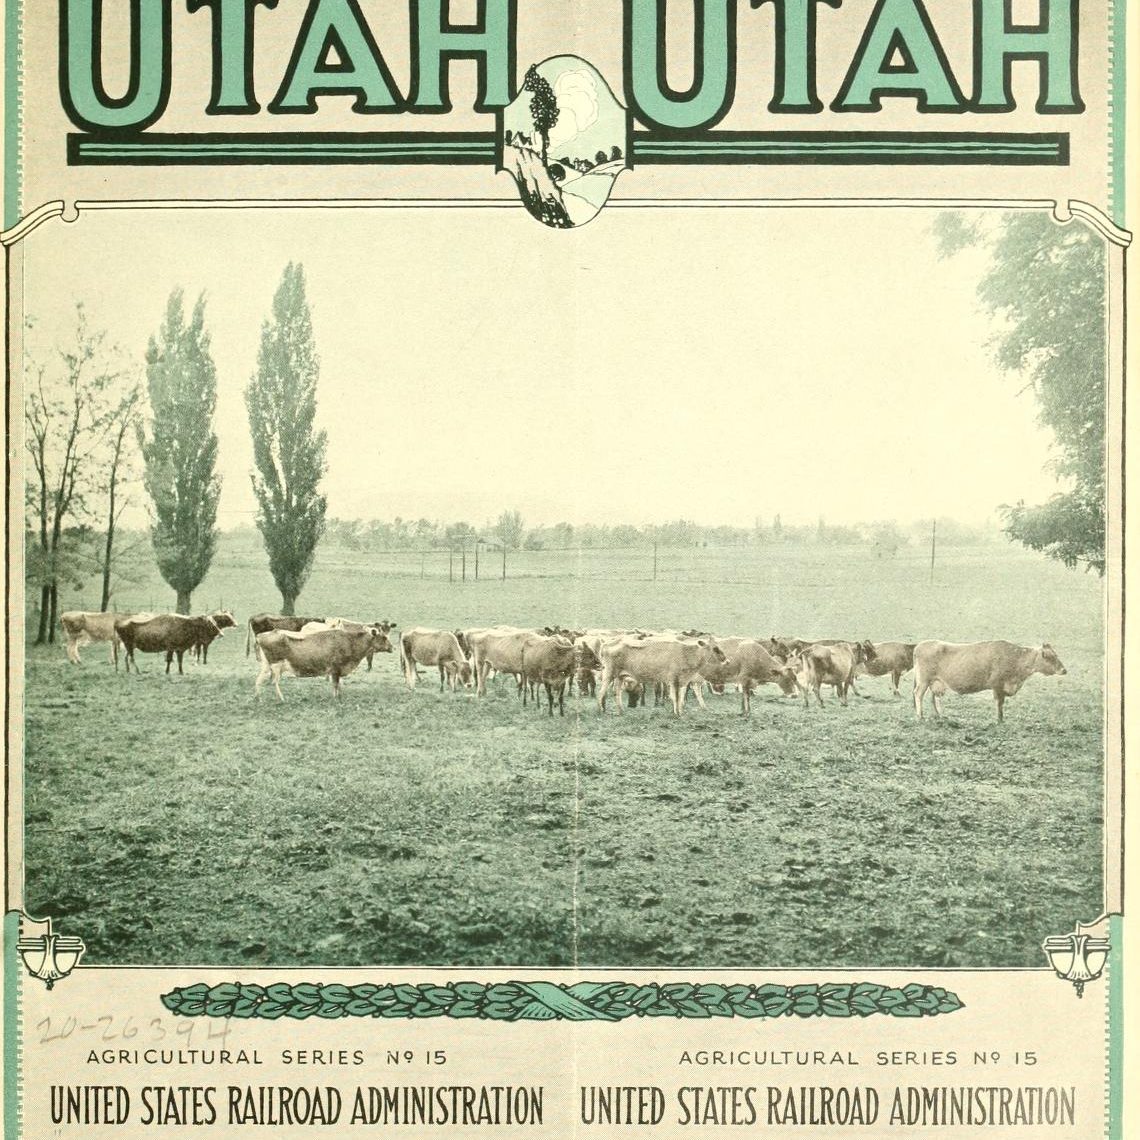 An old agricultural booklet